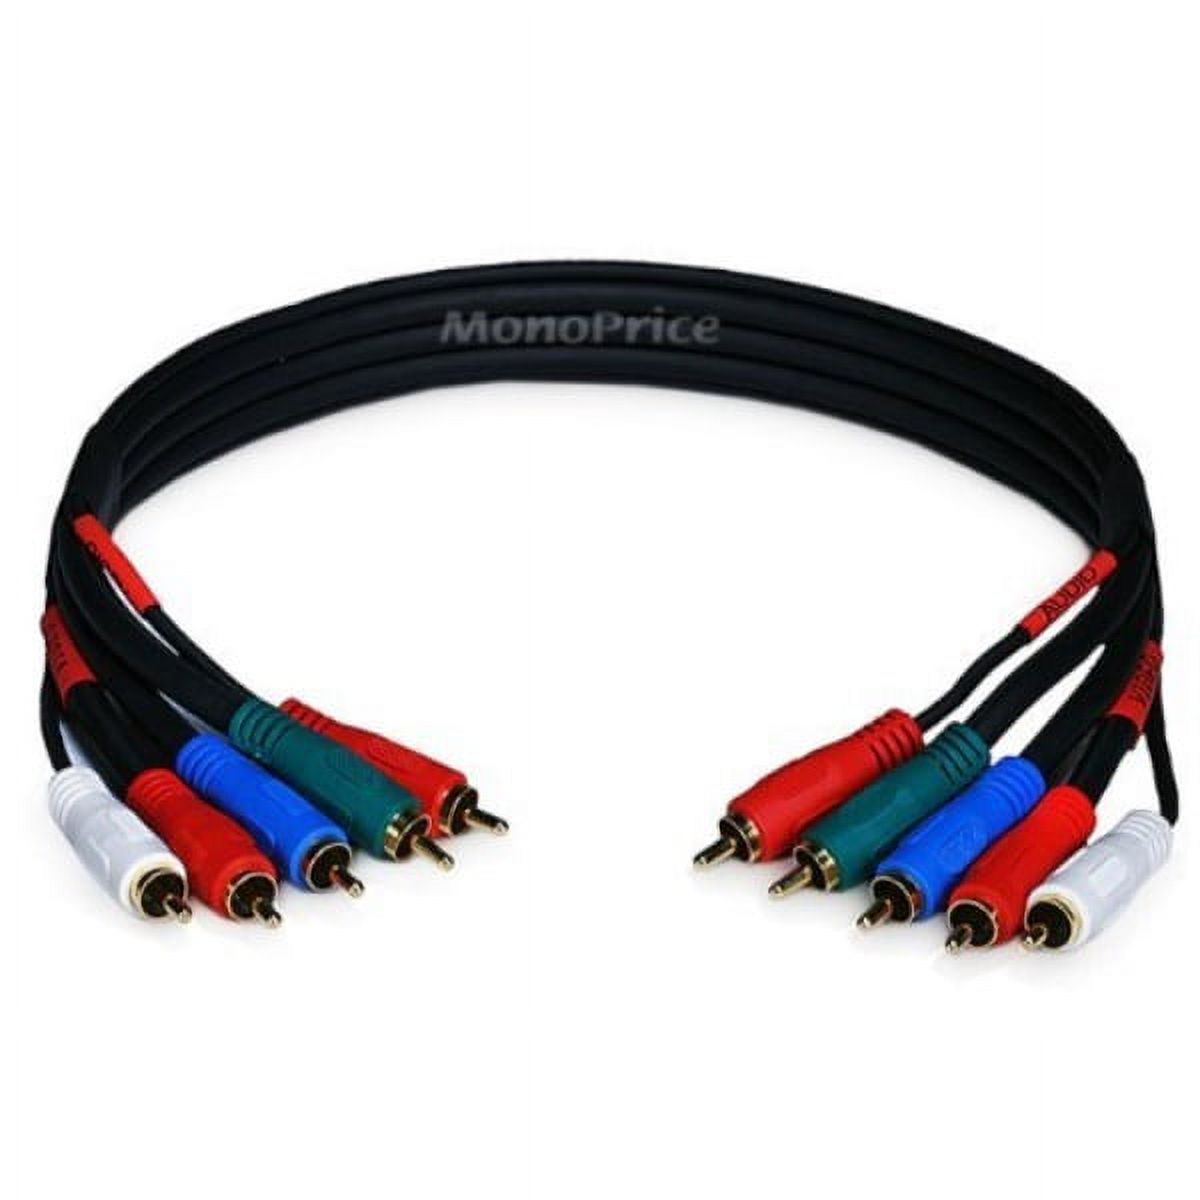 monoprice 1.5ft 22awg 5-rca component video/audio coaxial cable (rg-59/u) - black (2 pack) - image 1 of 2